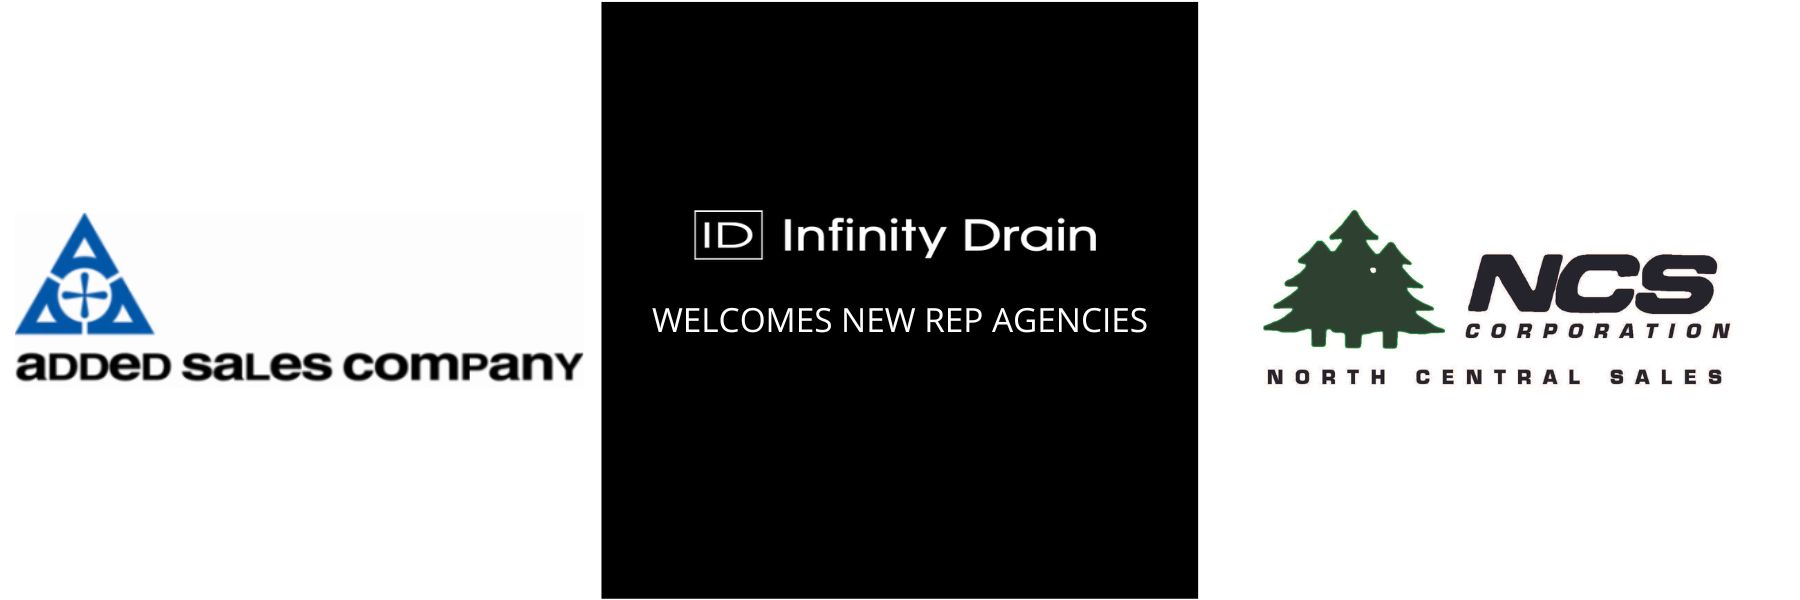 Infinity Drain® Welcomes New Rep Agencies for Midwest States